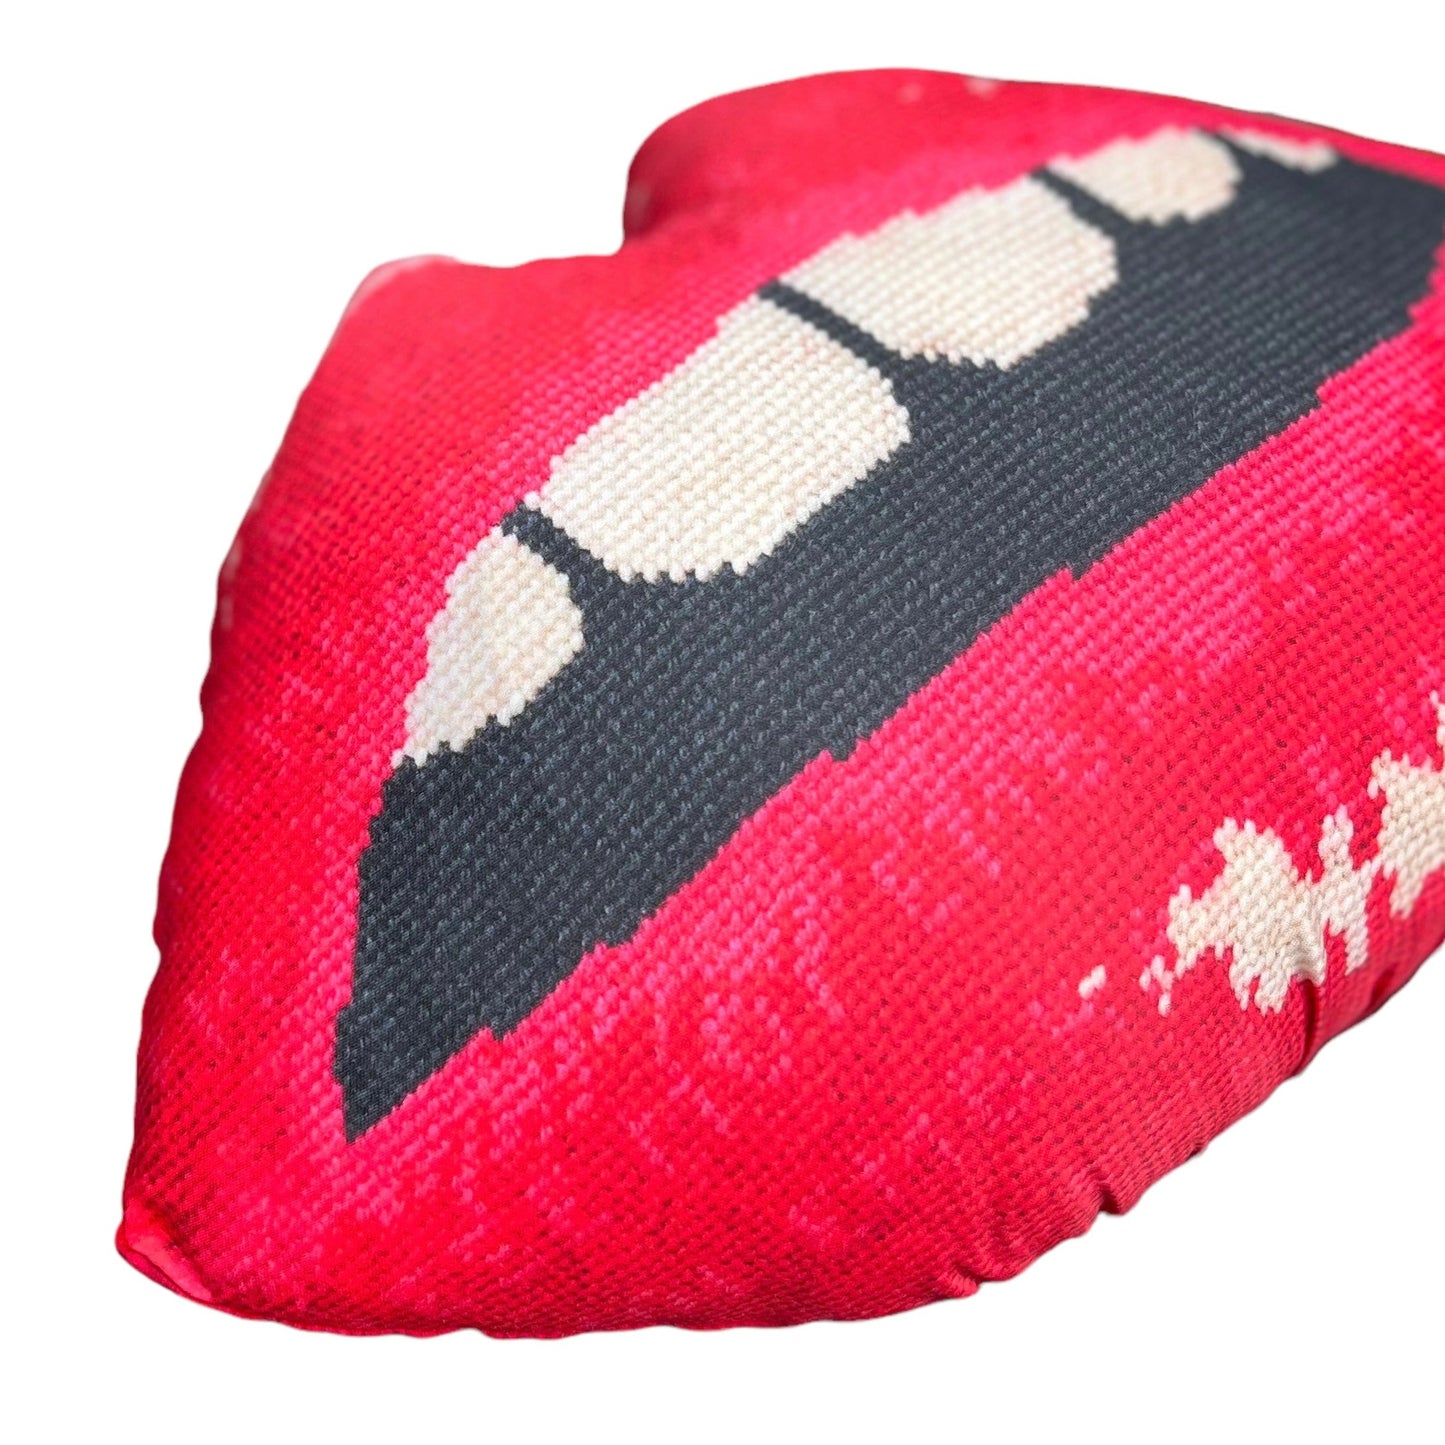 Sculpted red lips pillow features red lips with open mouth  & gapped teeth.  Featured on Disney+ High School Musical The Series.